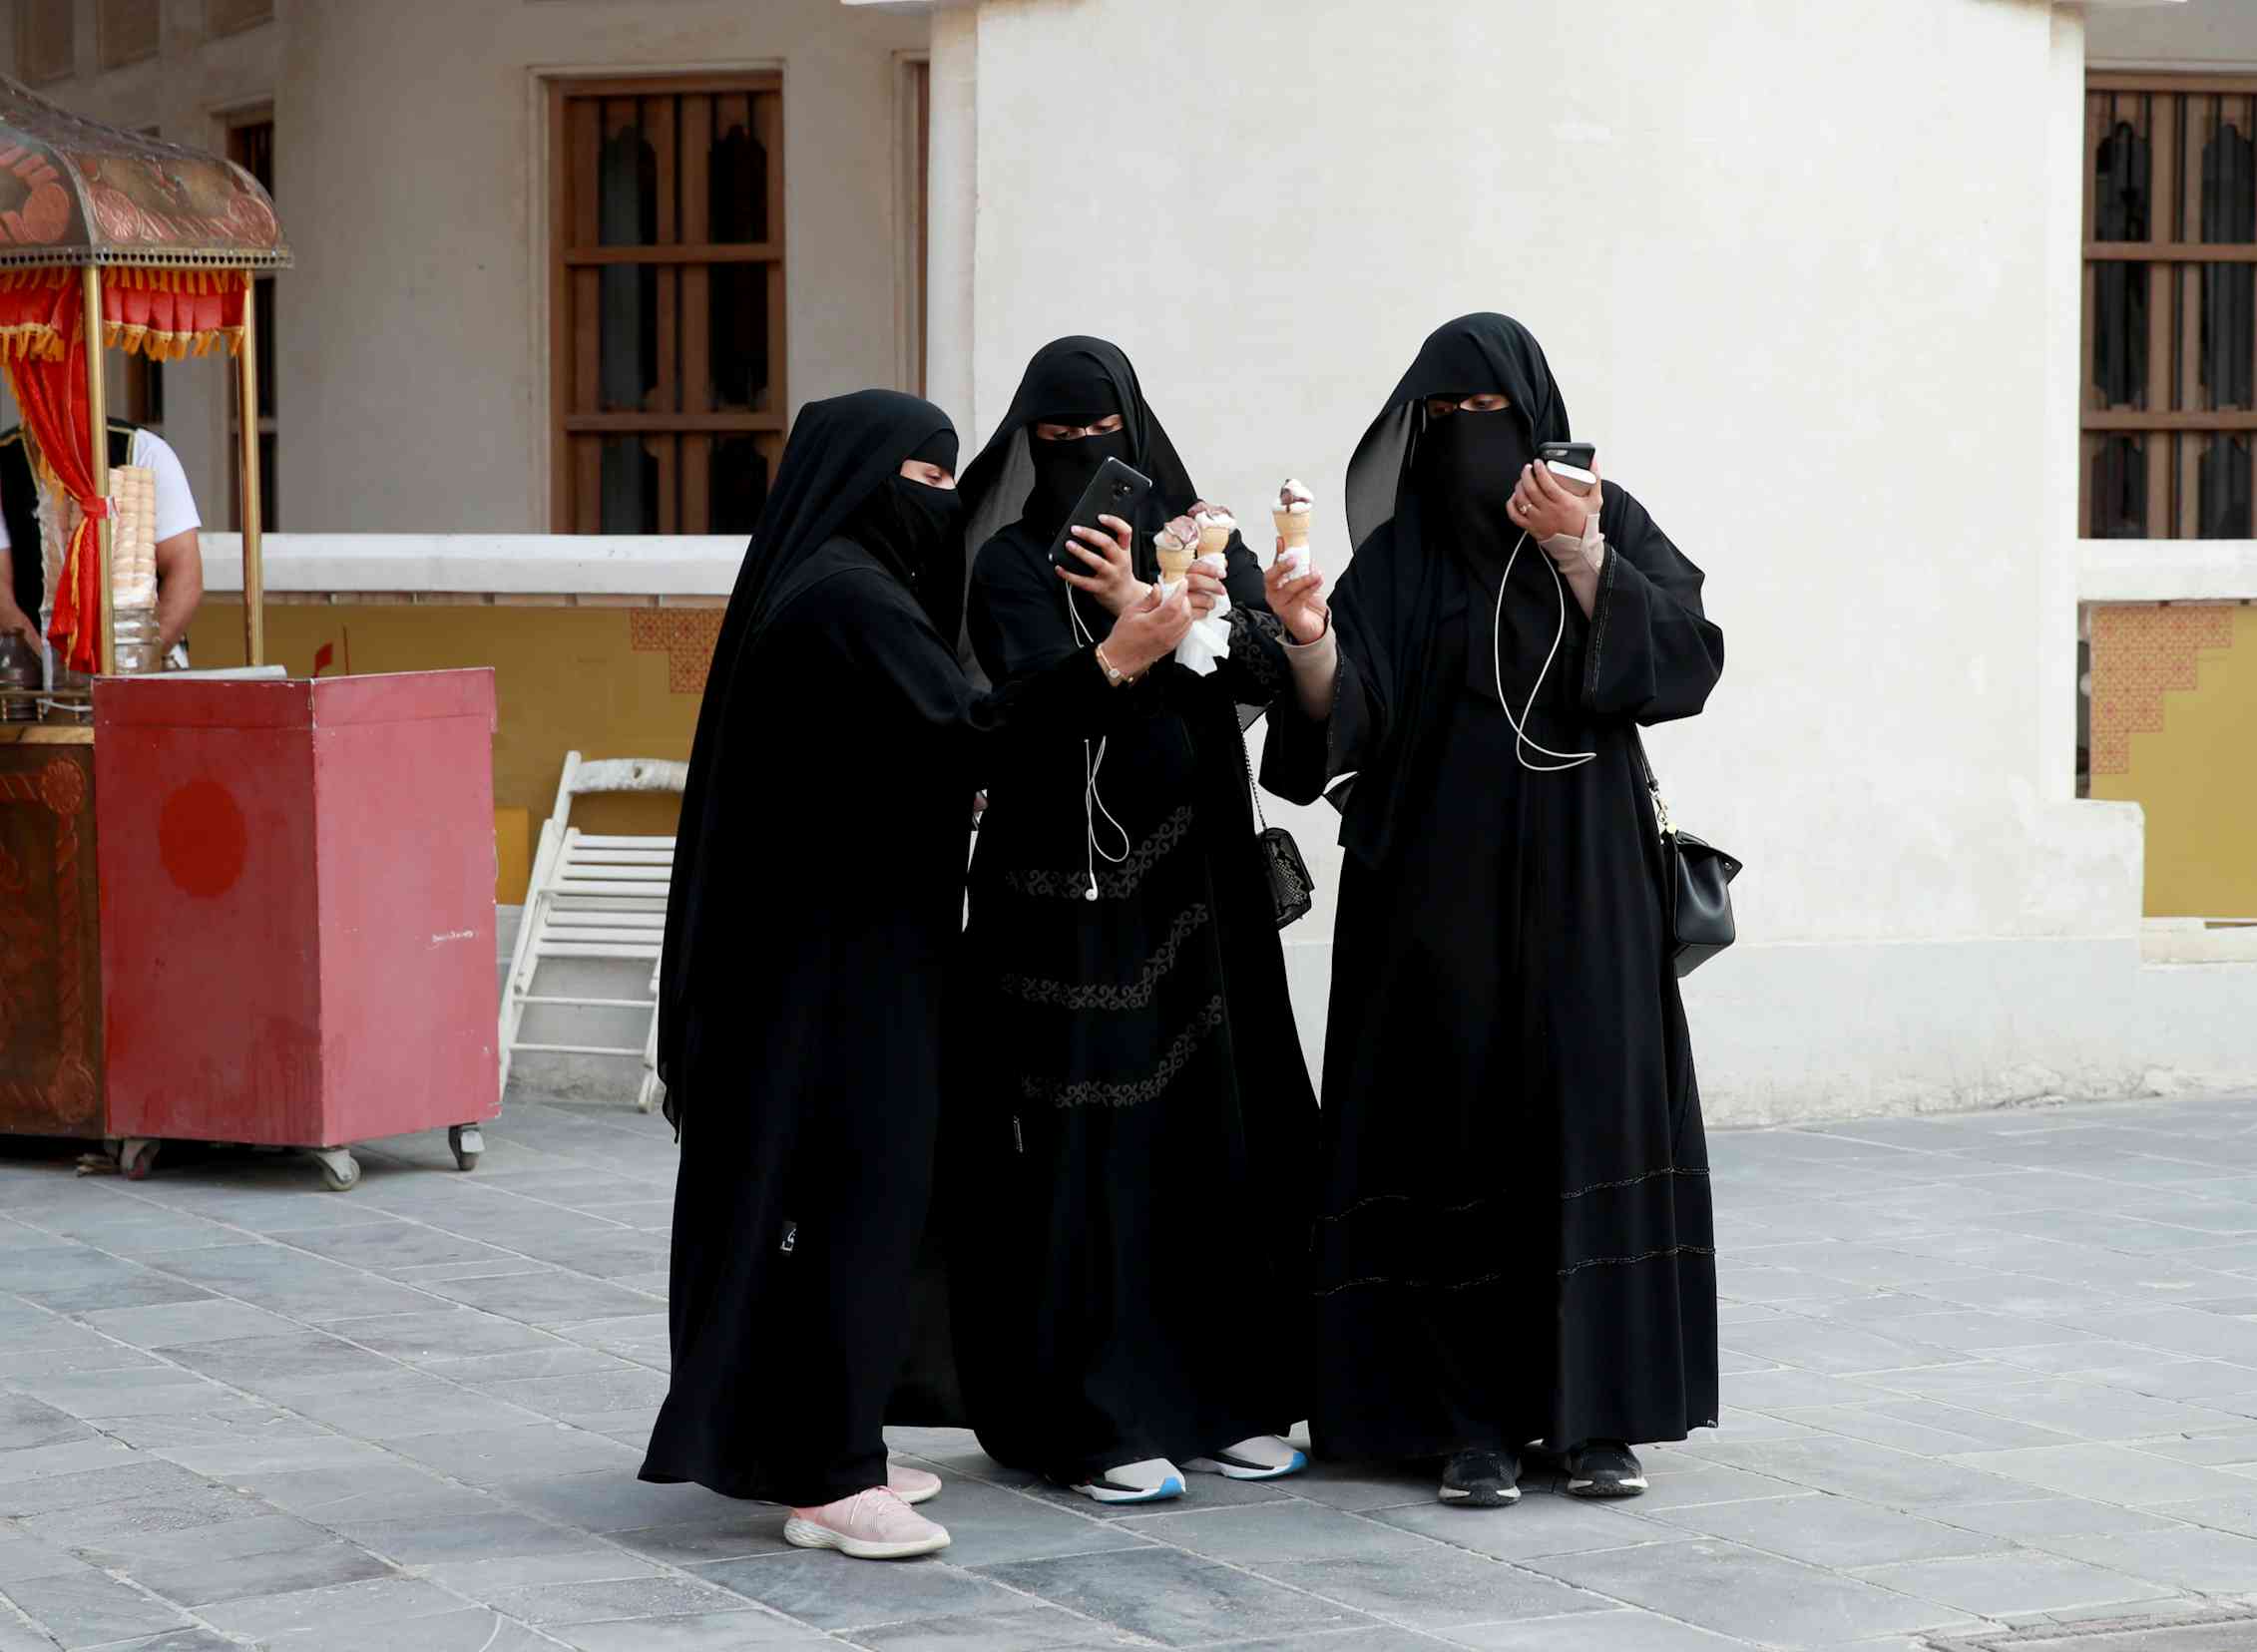 Women In Arab Countries Find Themselves Torn Between Opportunity And